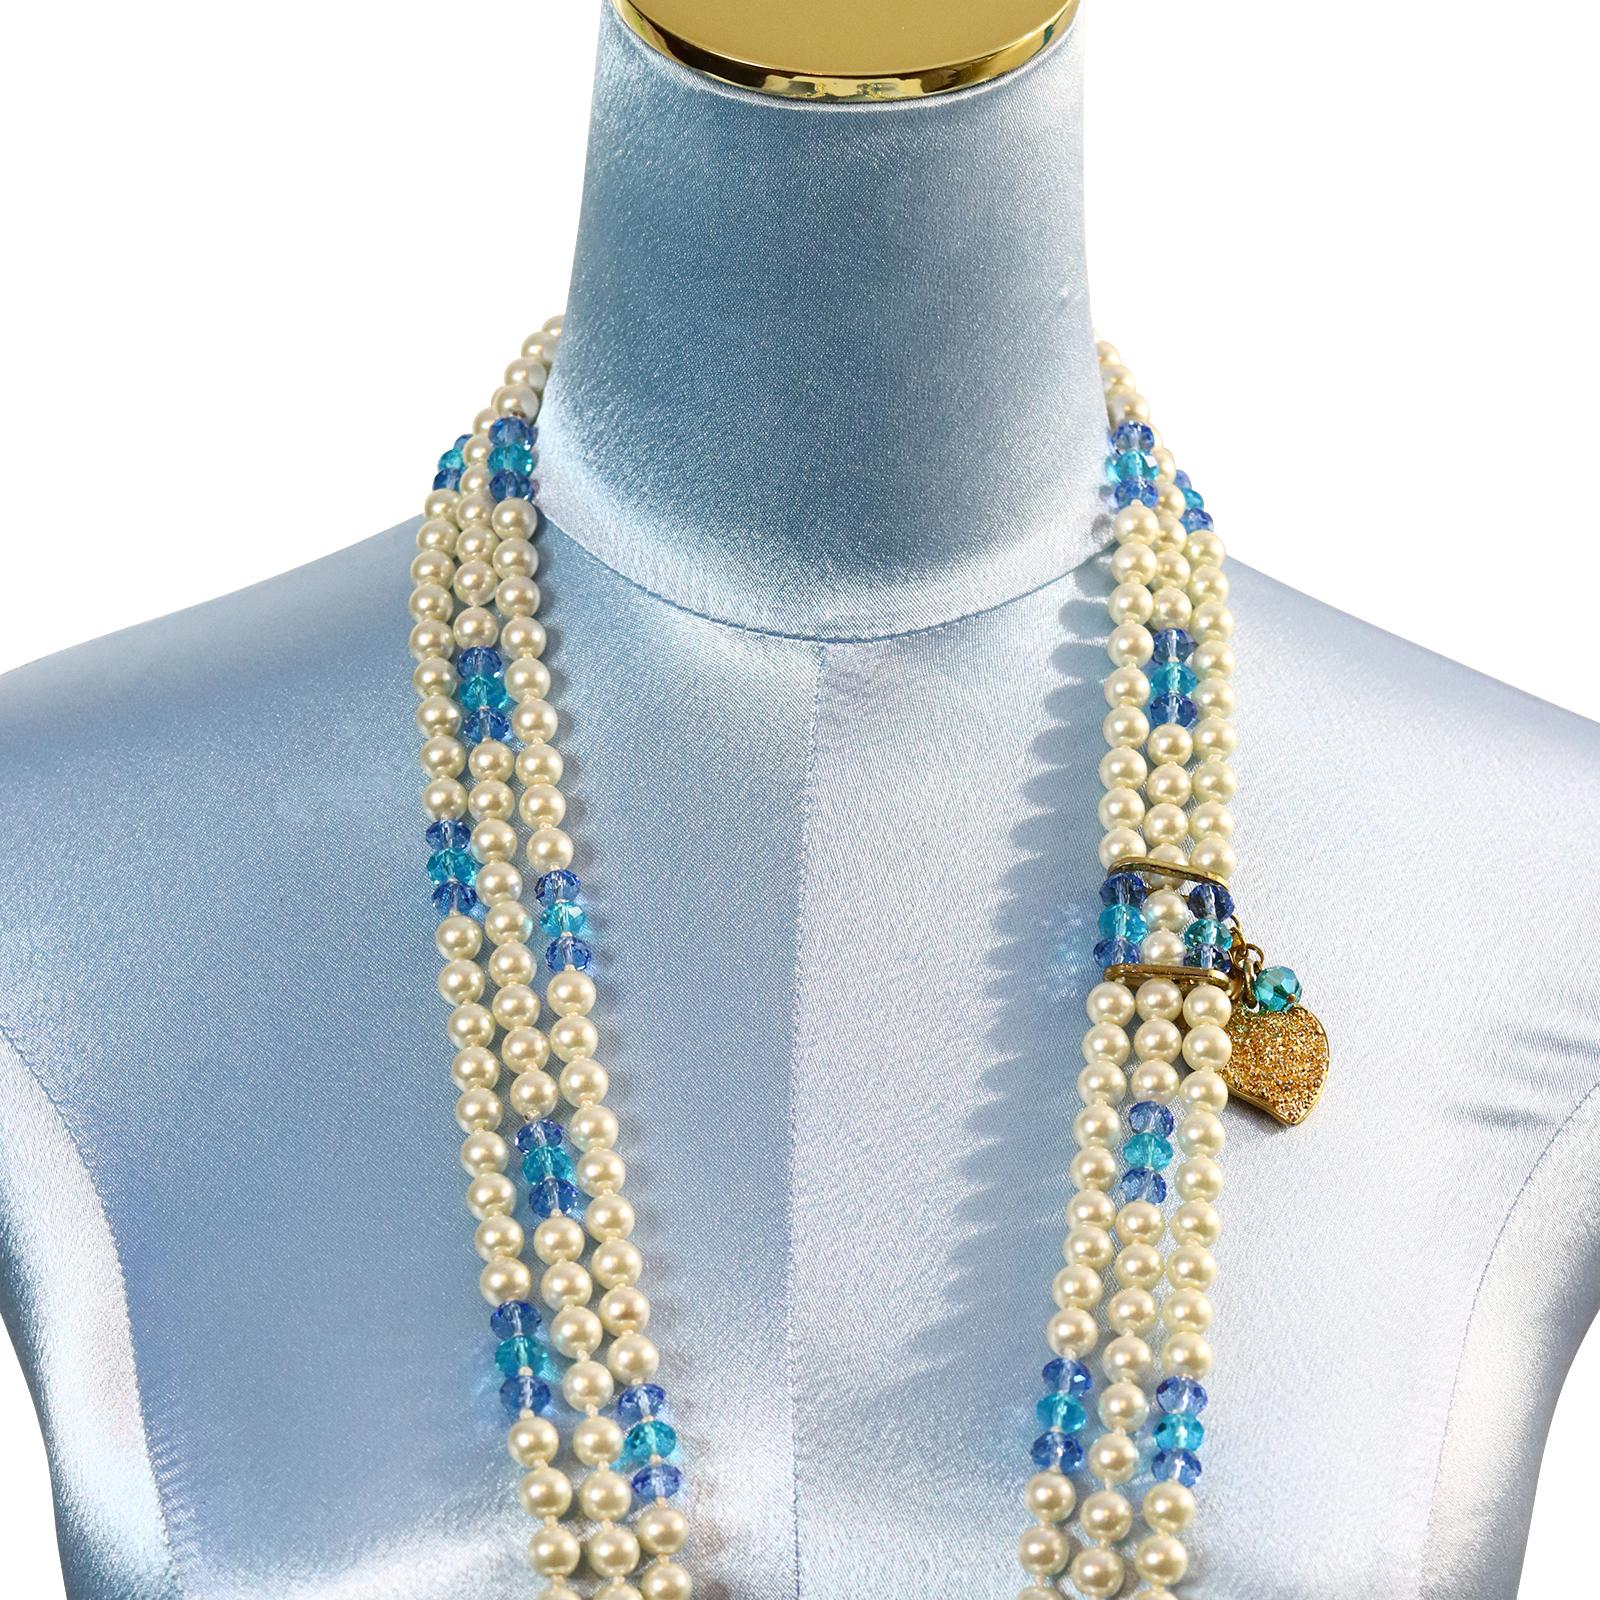 Vintage Yves Saint Laurent YSL 3 Strand Pearl and Blue Bead Necklace Circa 1990s.  Quite Different.  The Three Strands have 3 beads mixed in with the Pearls to Offset the Color. They are Held together by a Gold Dangling Heart in the Back signed by